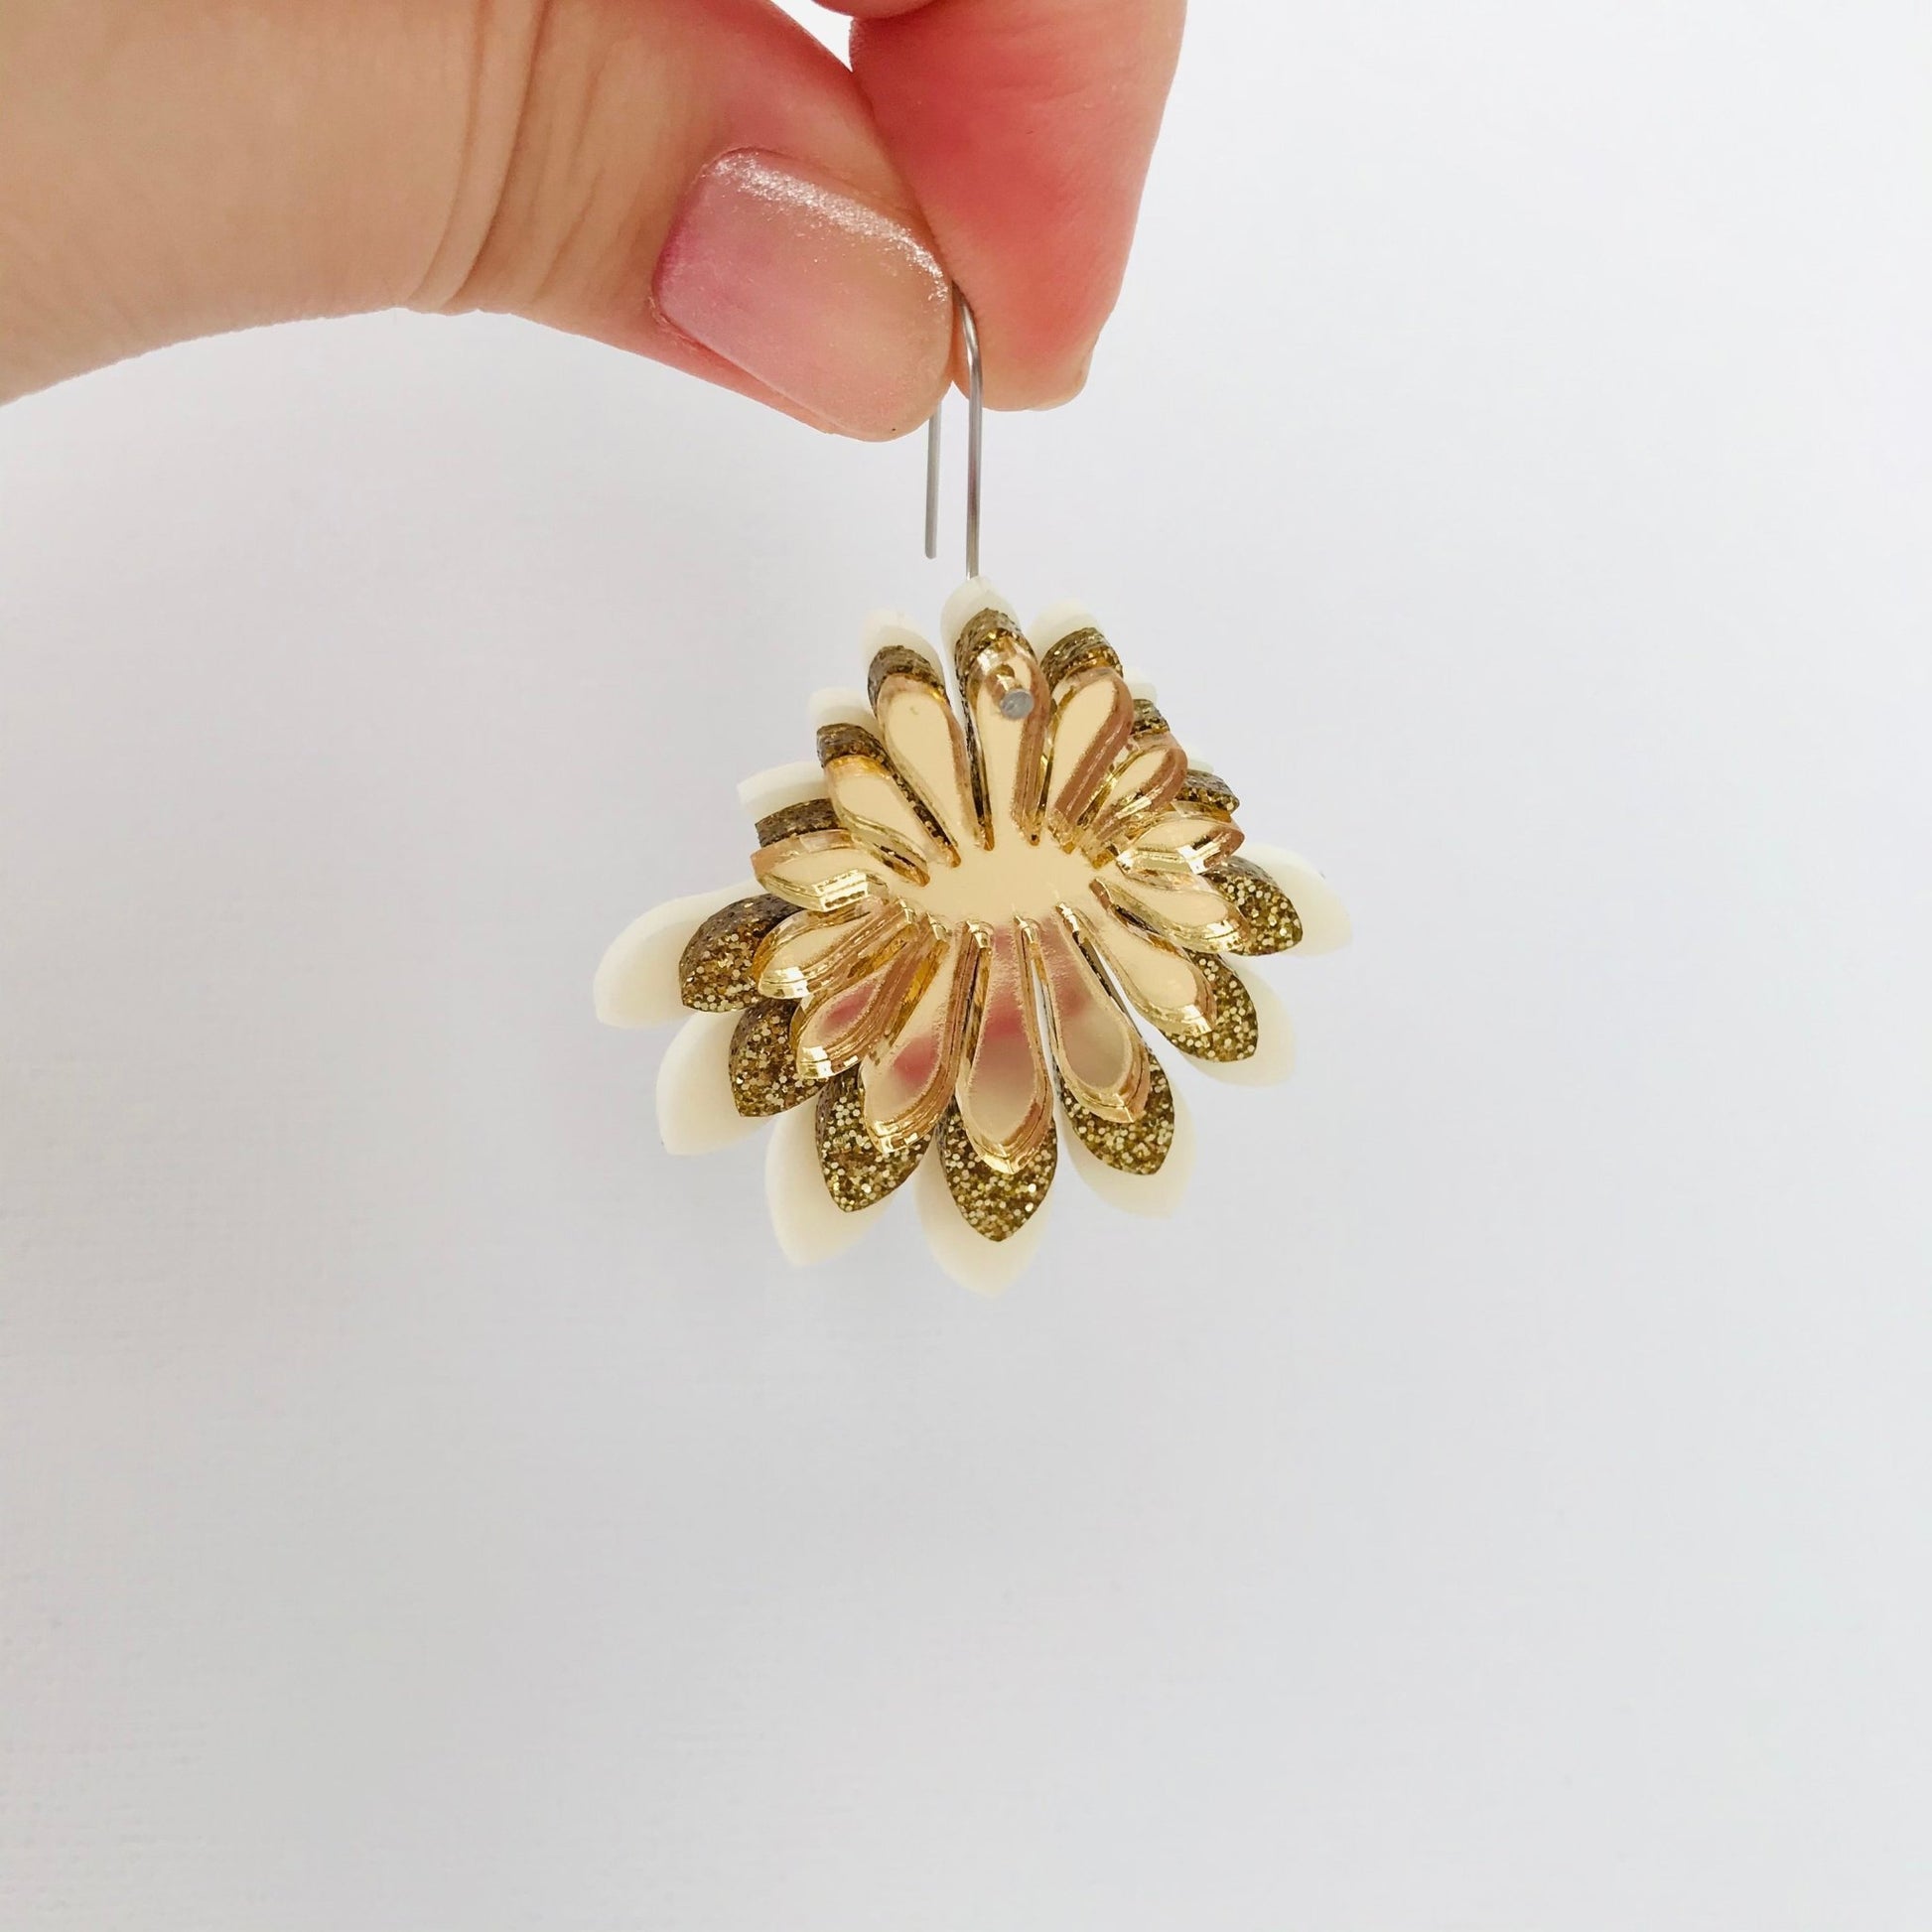 Large Flower Frill Statement Earrings - Ivory and Gold - Lacey Lou Sparkles